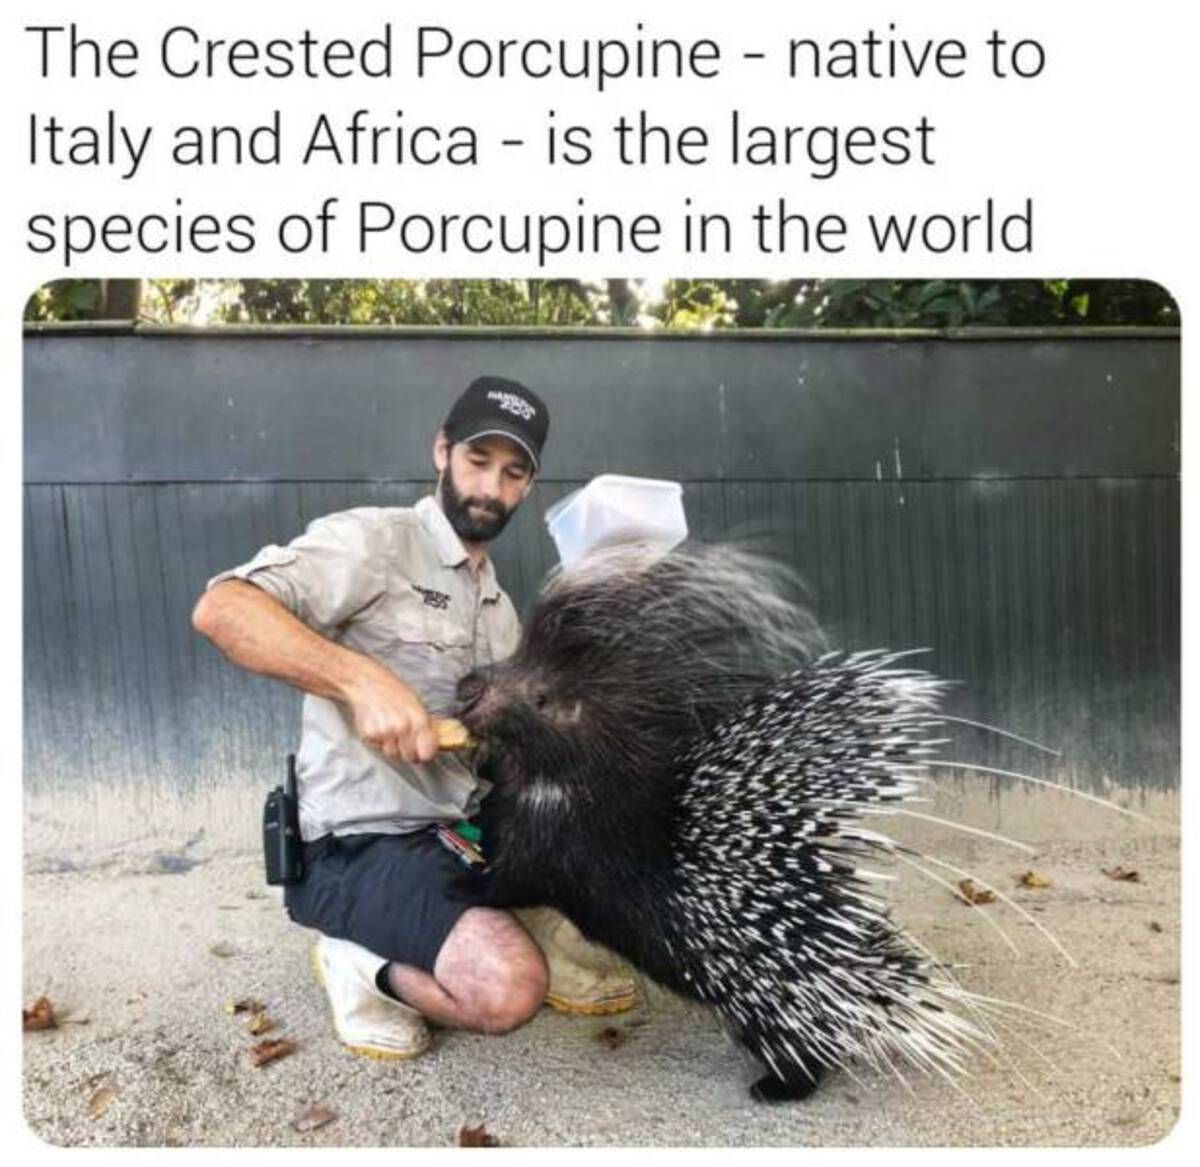 fauna - The Crested Porcupine native to Italy and Africa is the largest species of Porcupine in the world